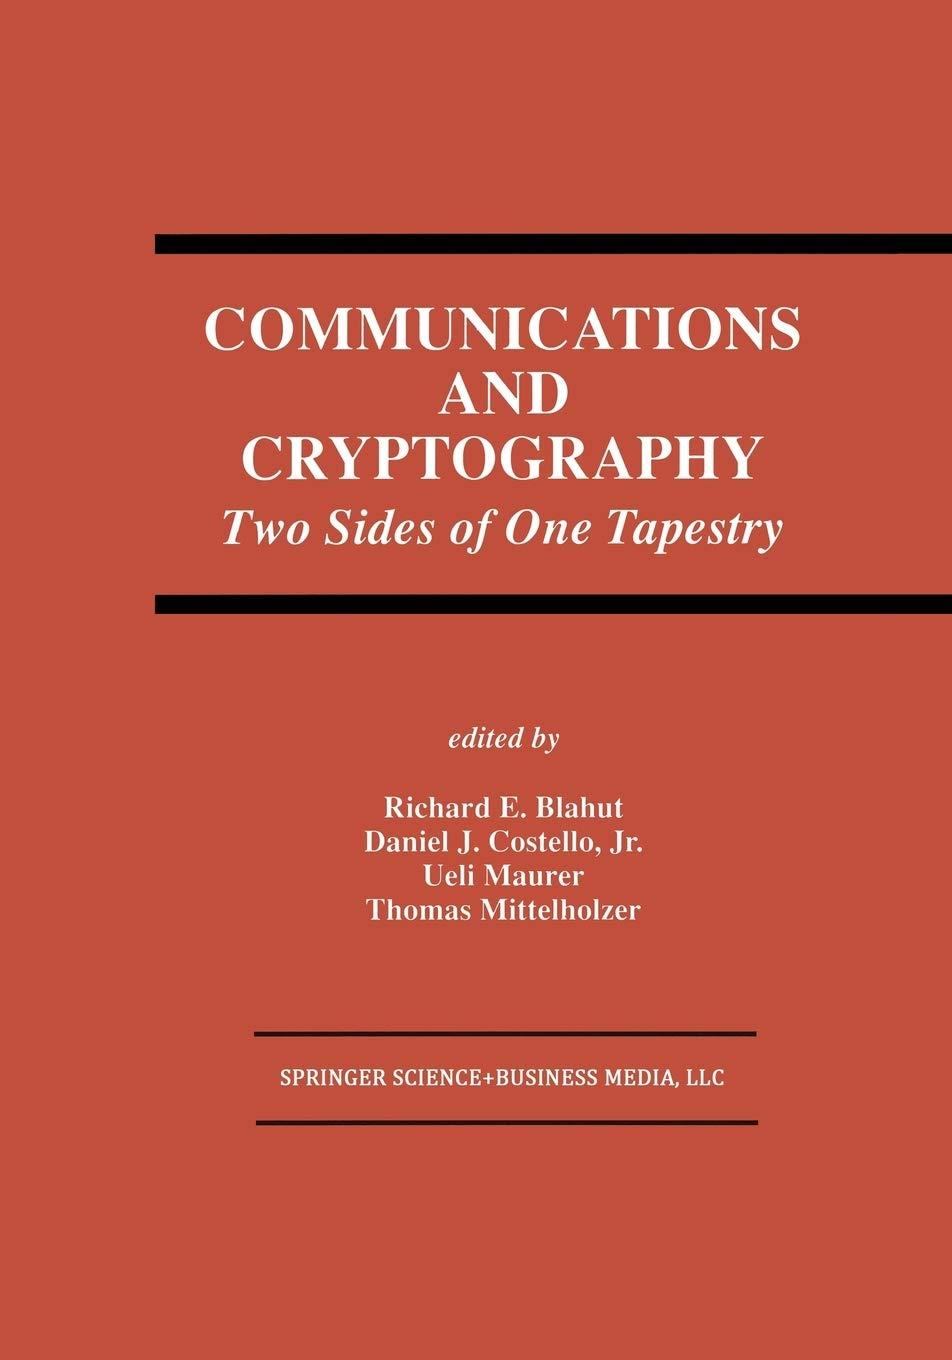 communications and cryptography two sides of one tapestry 1994 edition richard e. blahut, daniel j. costello